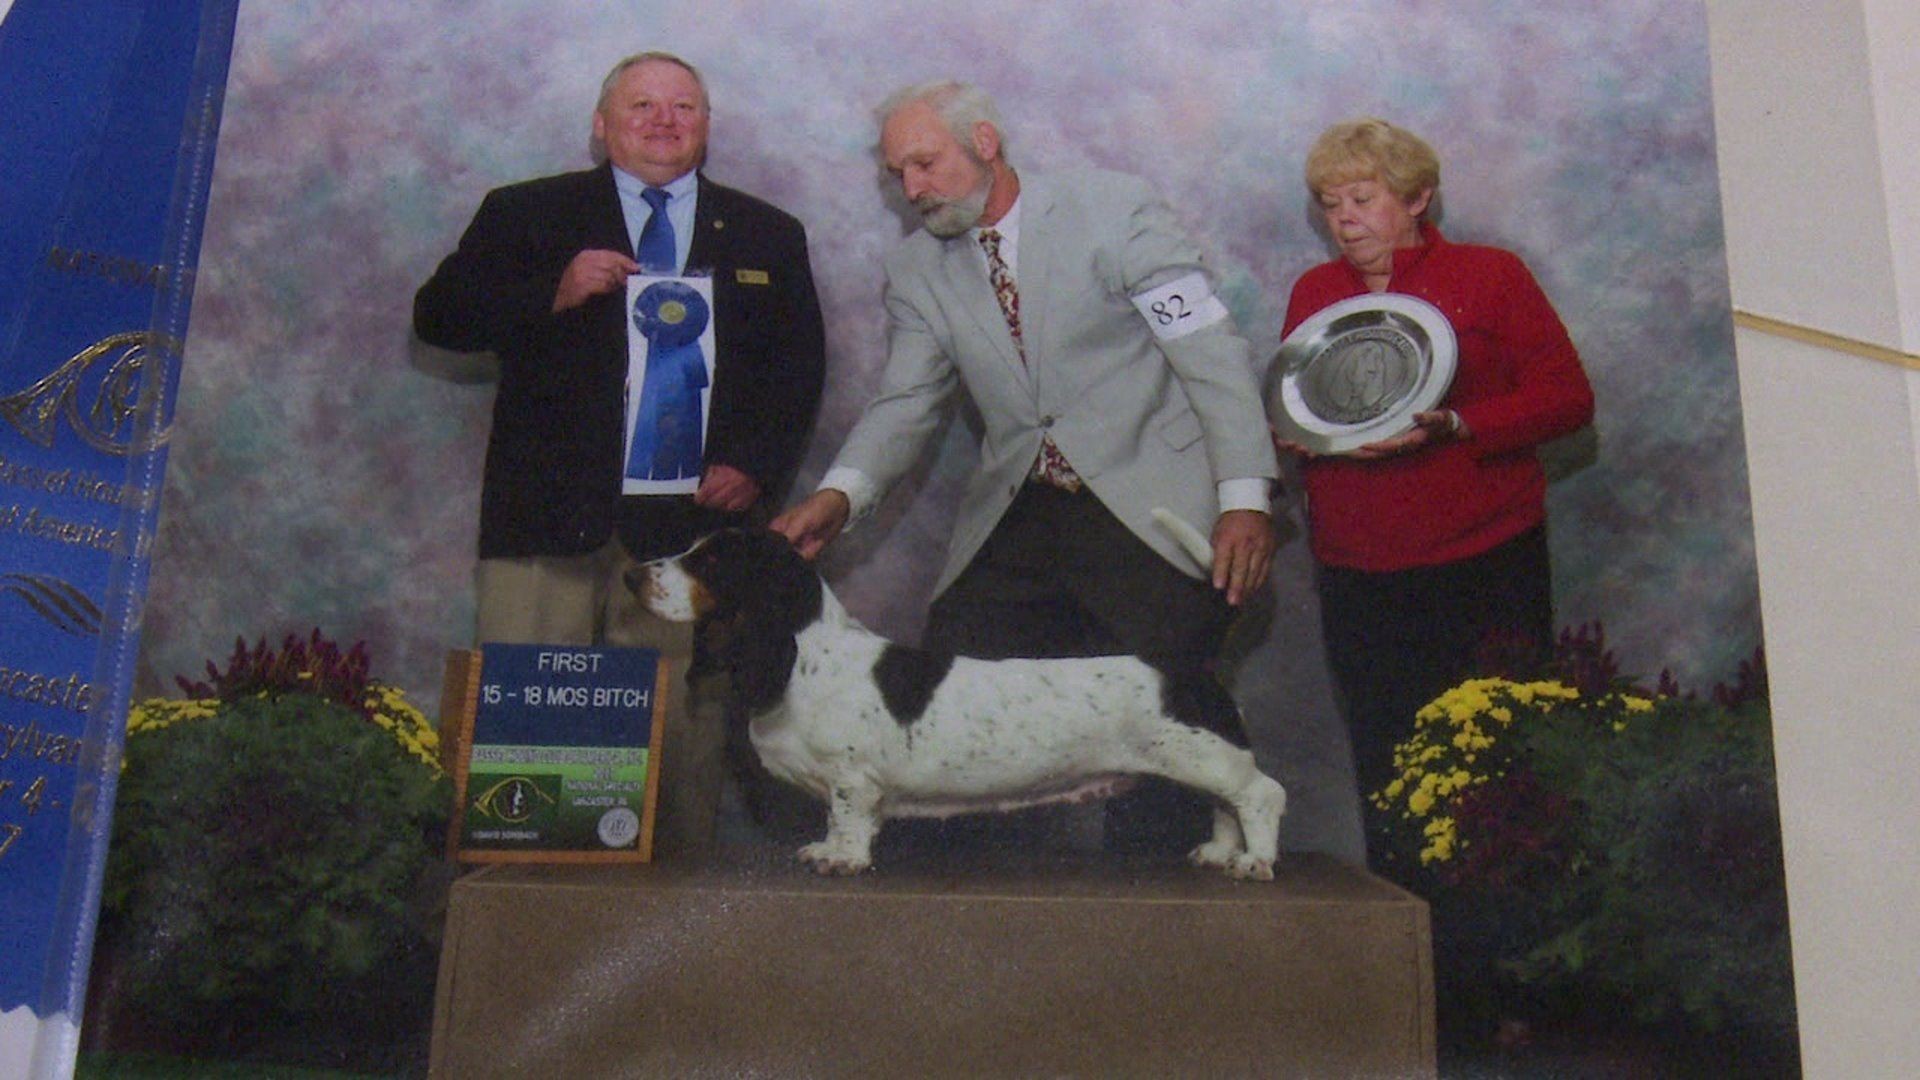 Basset Hound from Luzerne County to Compete in Westminster Dog Show